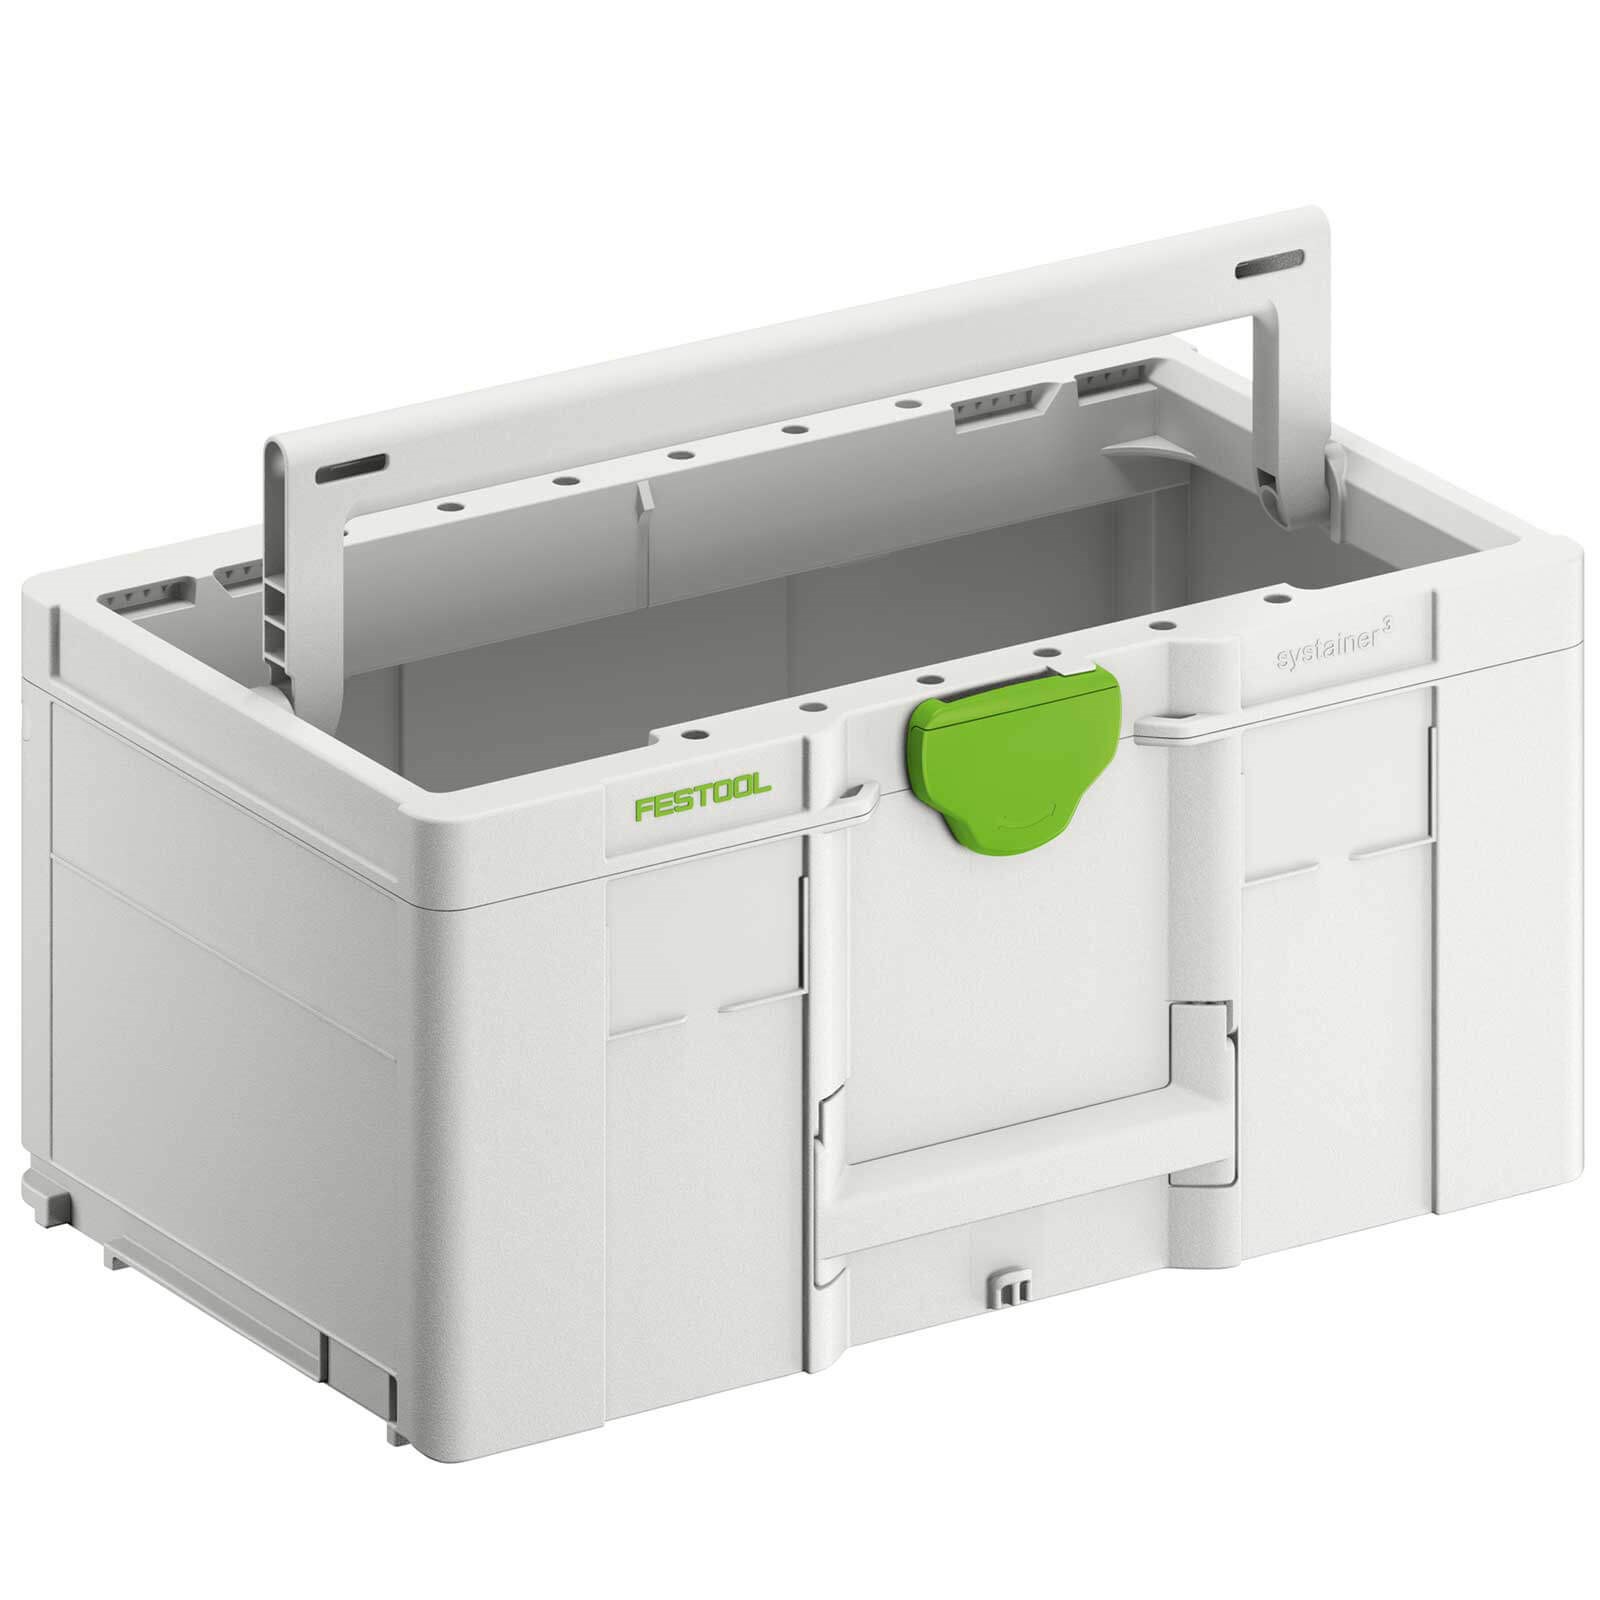 Festool Systainer 3 ToolBox SYS3 TB Large Tool Case